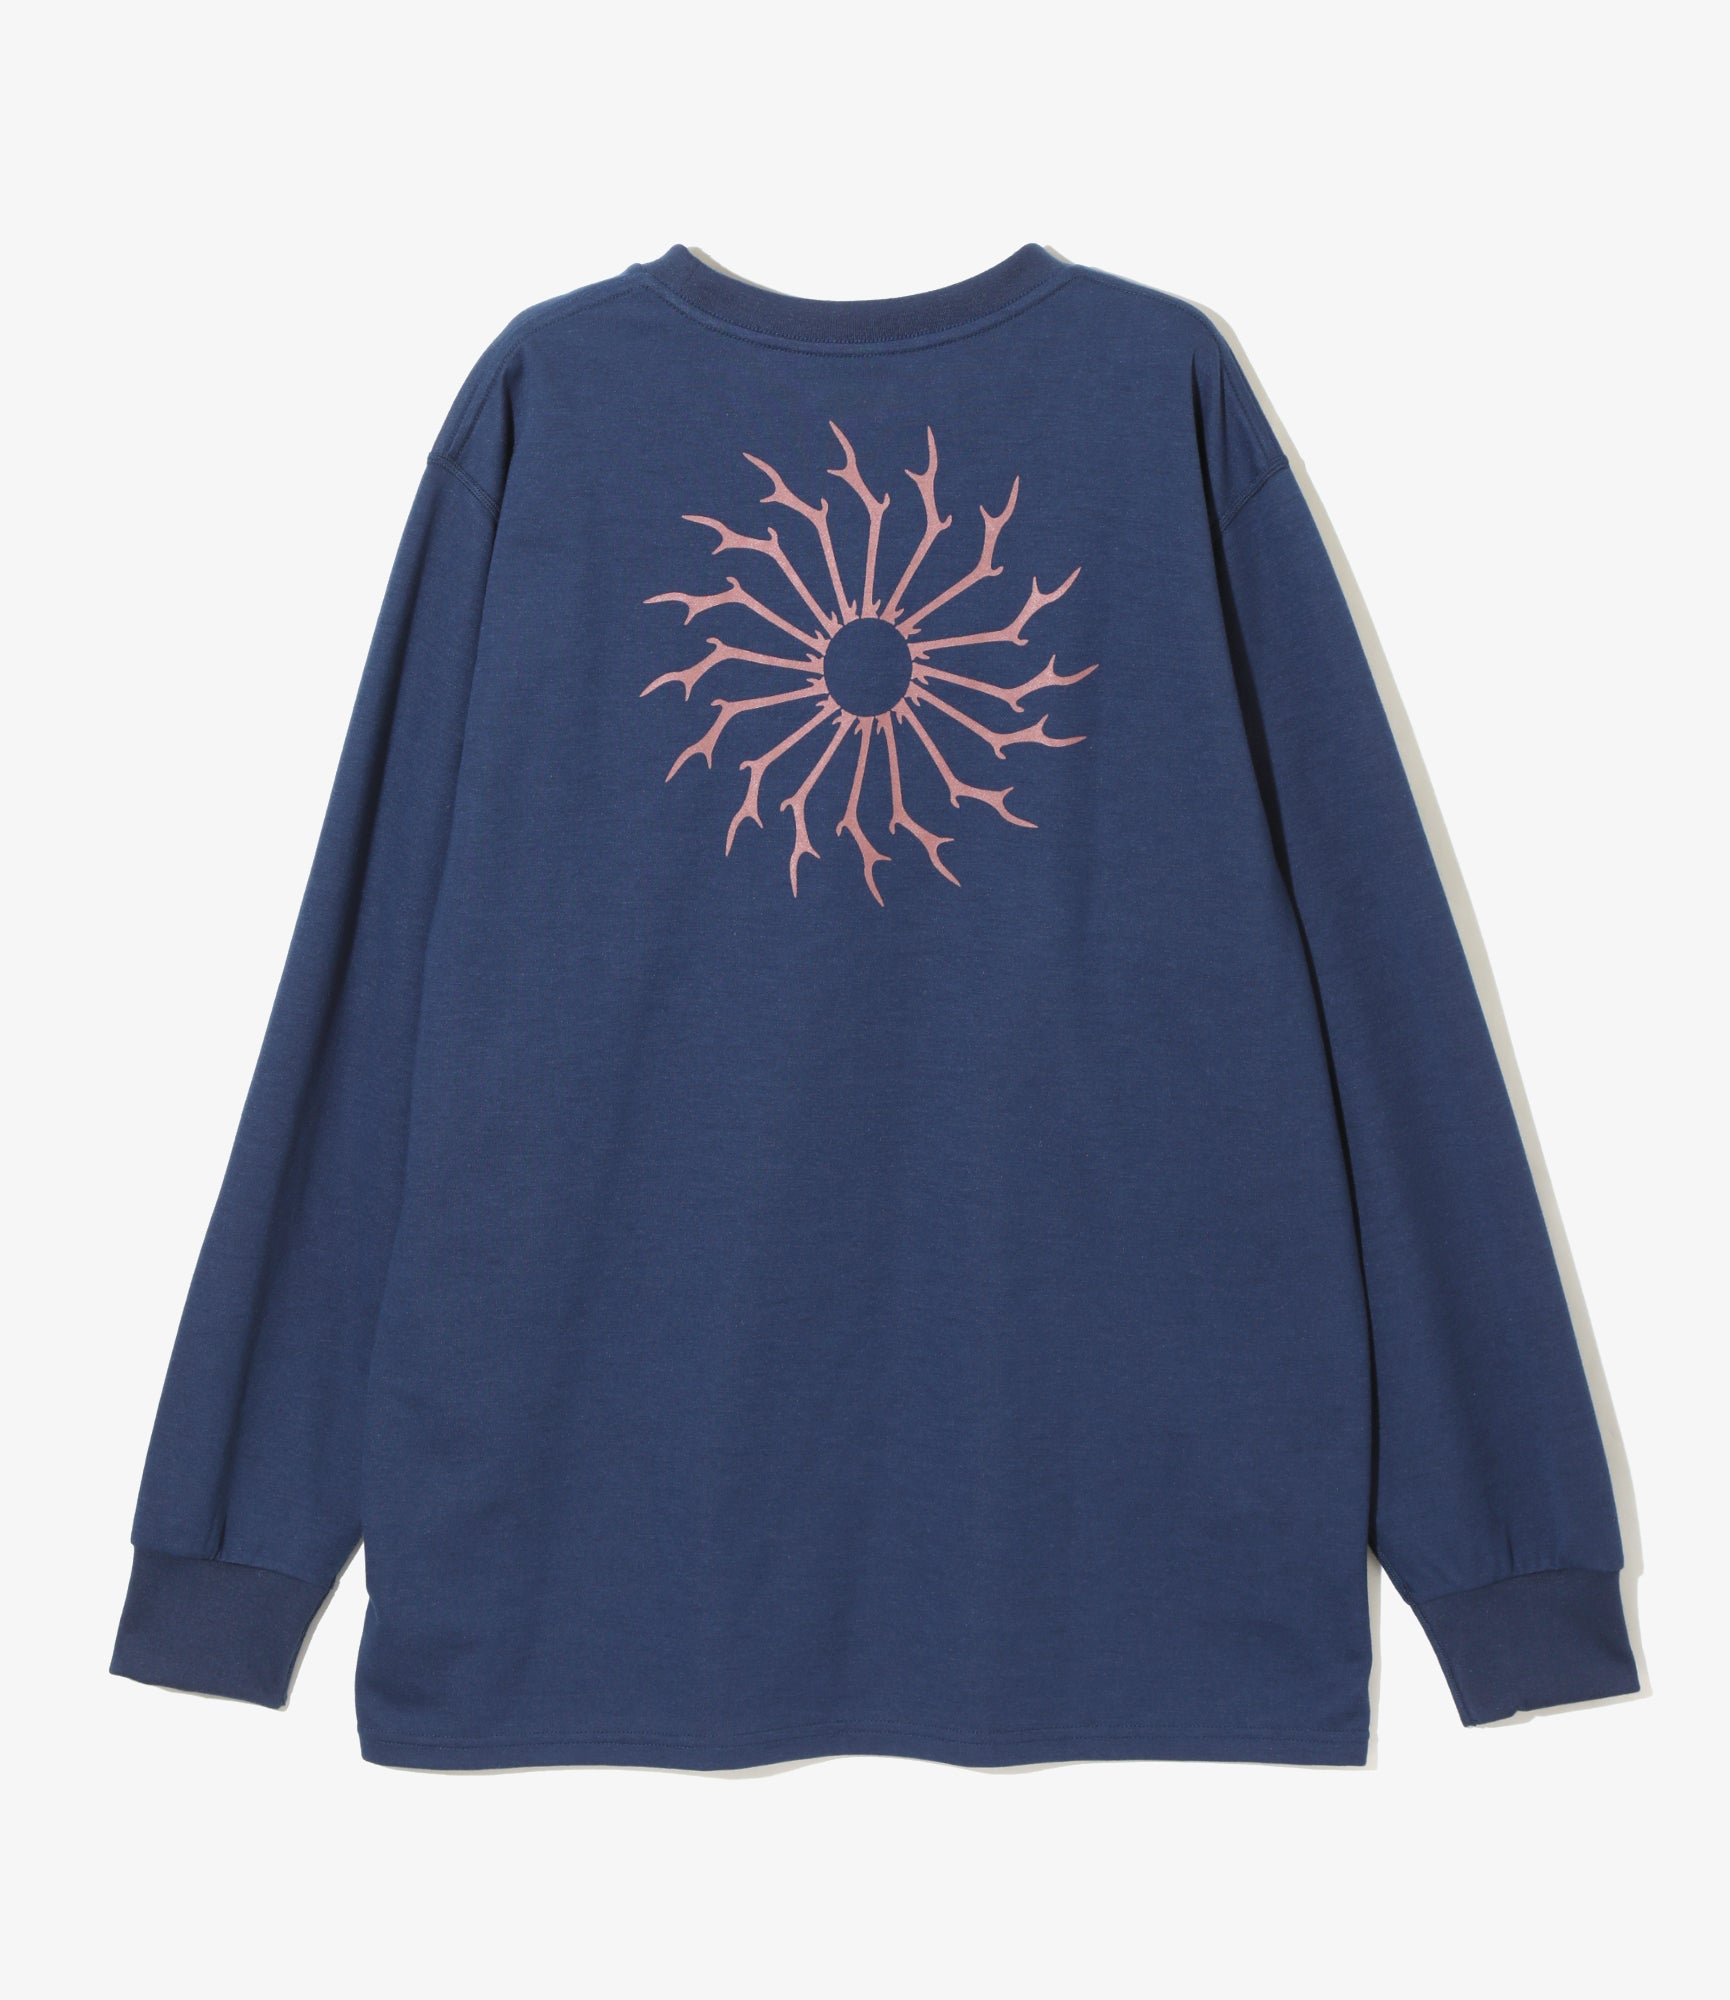 South2 West8 L/S Round Pocket Tee - Circle Horn - Navy